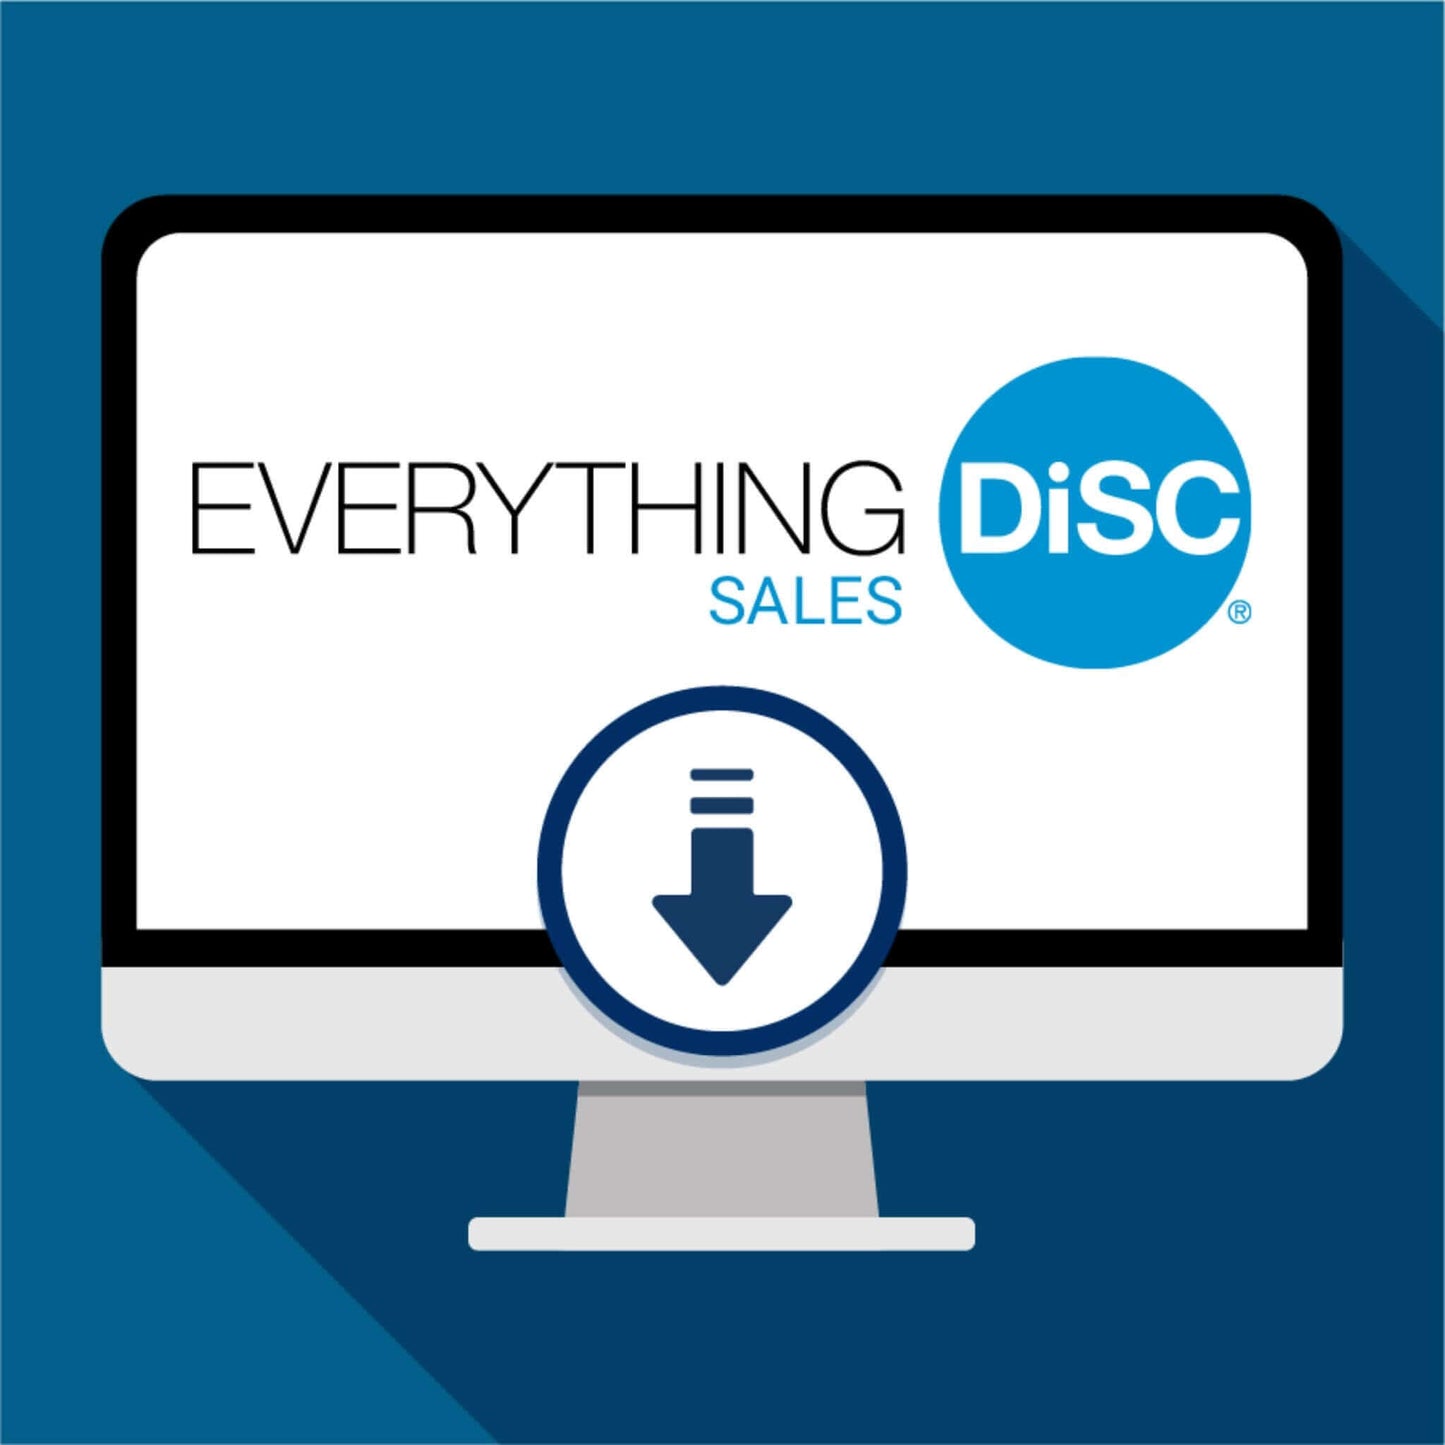 DiSC for sales trainer kit is meant to be used with Everything DiSC sales reports